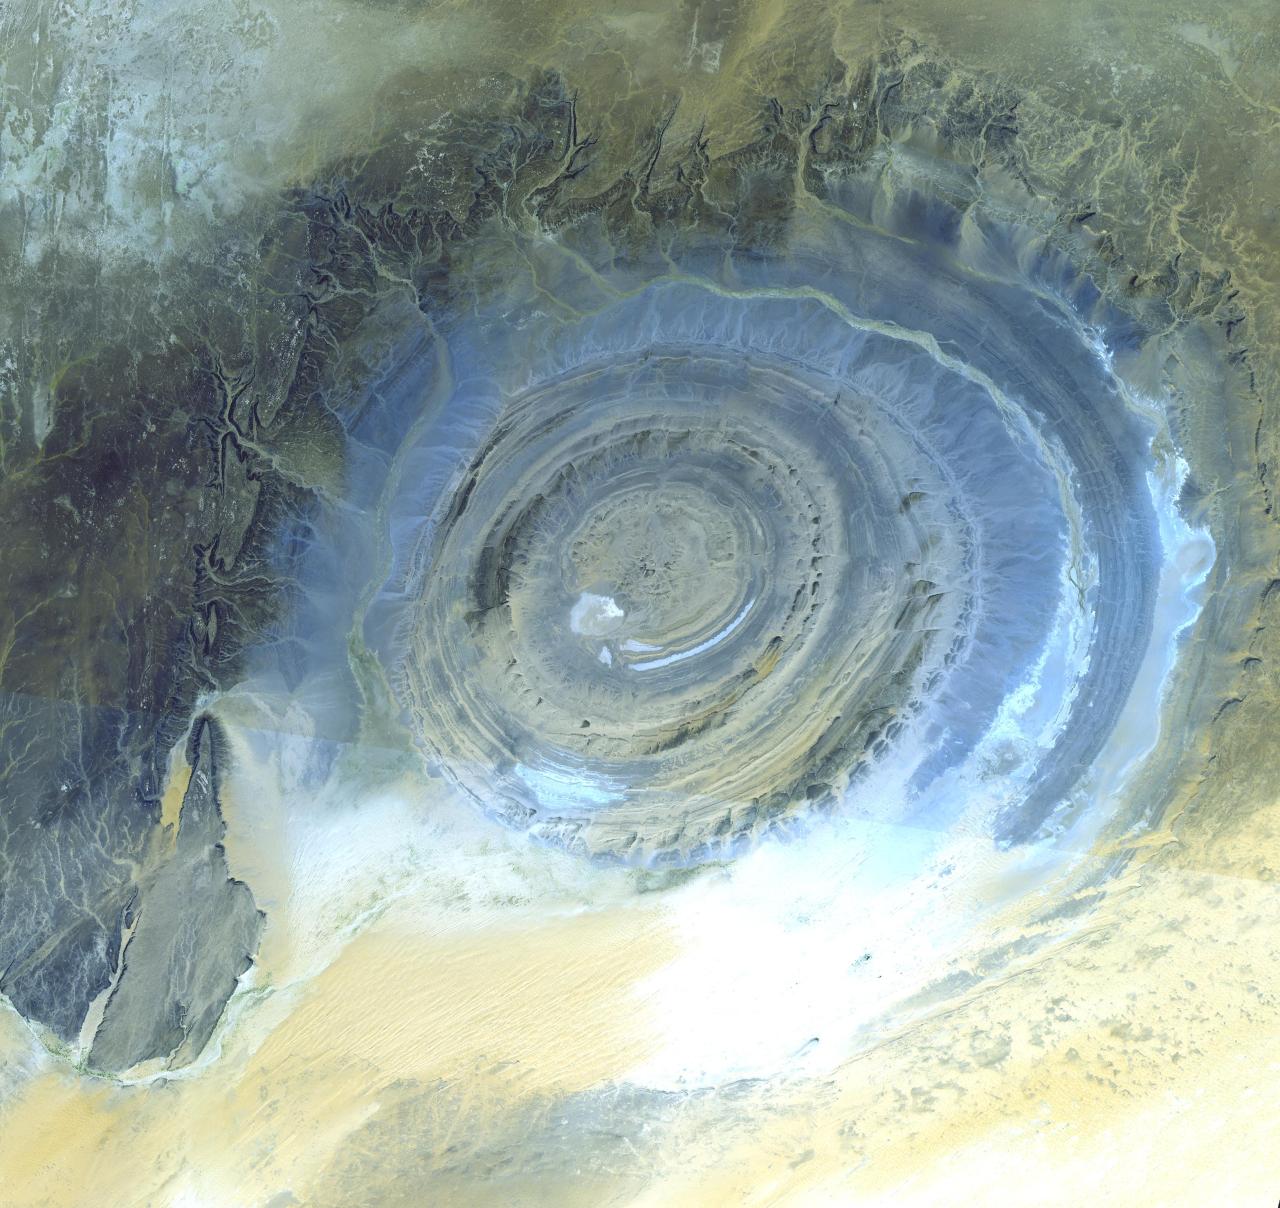 itscarororo:  npr:skunkbear:The Richat Structure or “The Eye of the Sahara” is